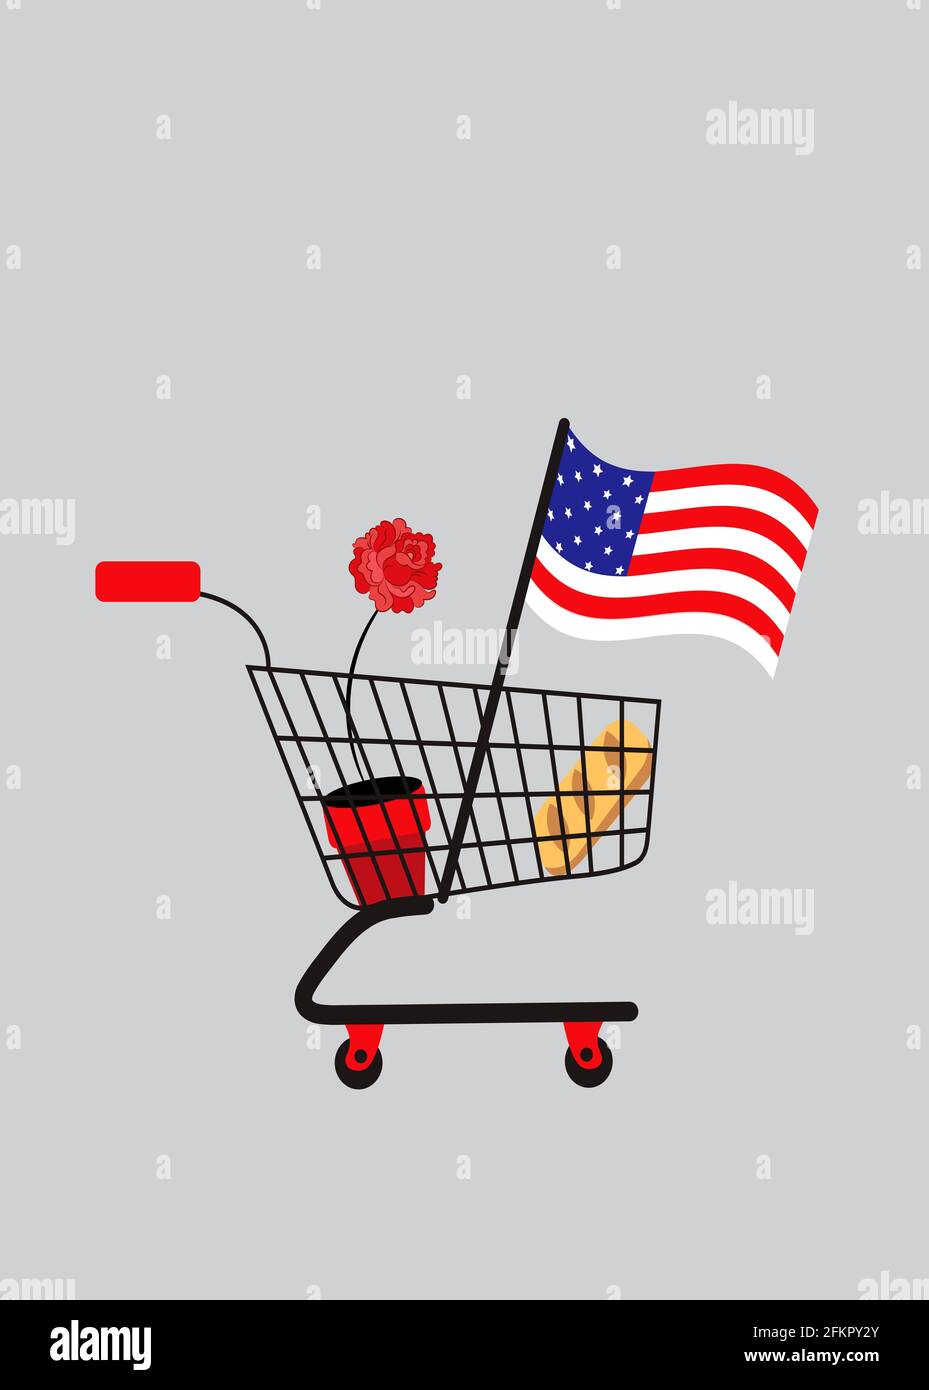 illustration of a supermarket basket with the american flag, a bread and a rose in it to symbolize idealism and poverty at the same time Stock Photo